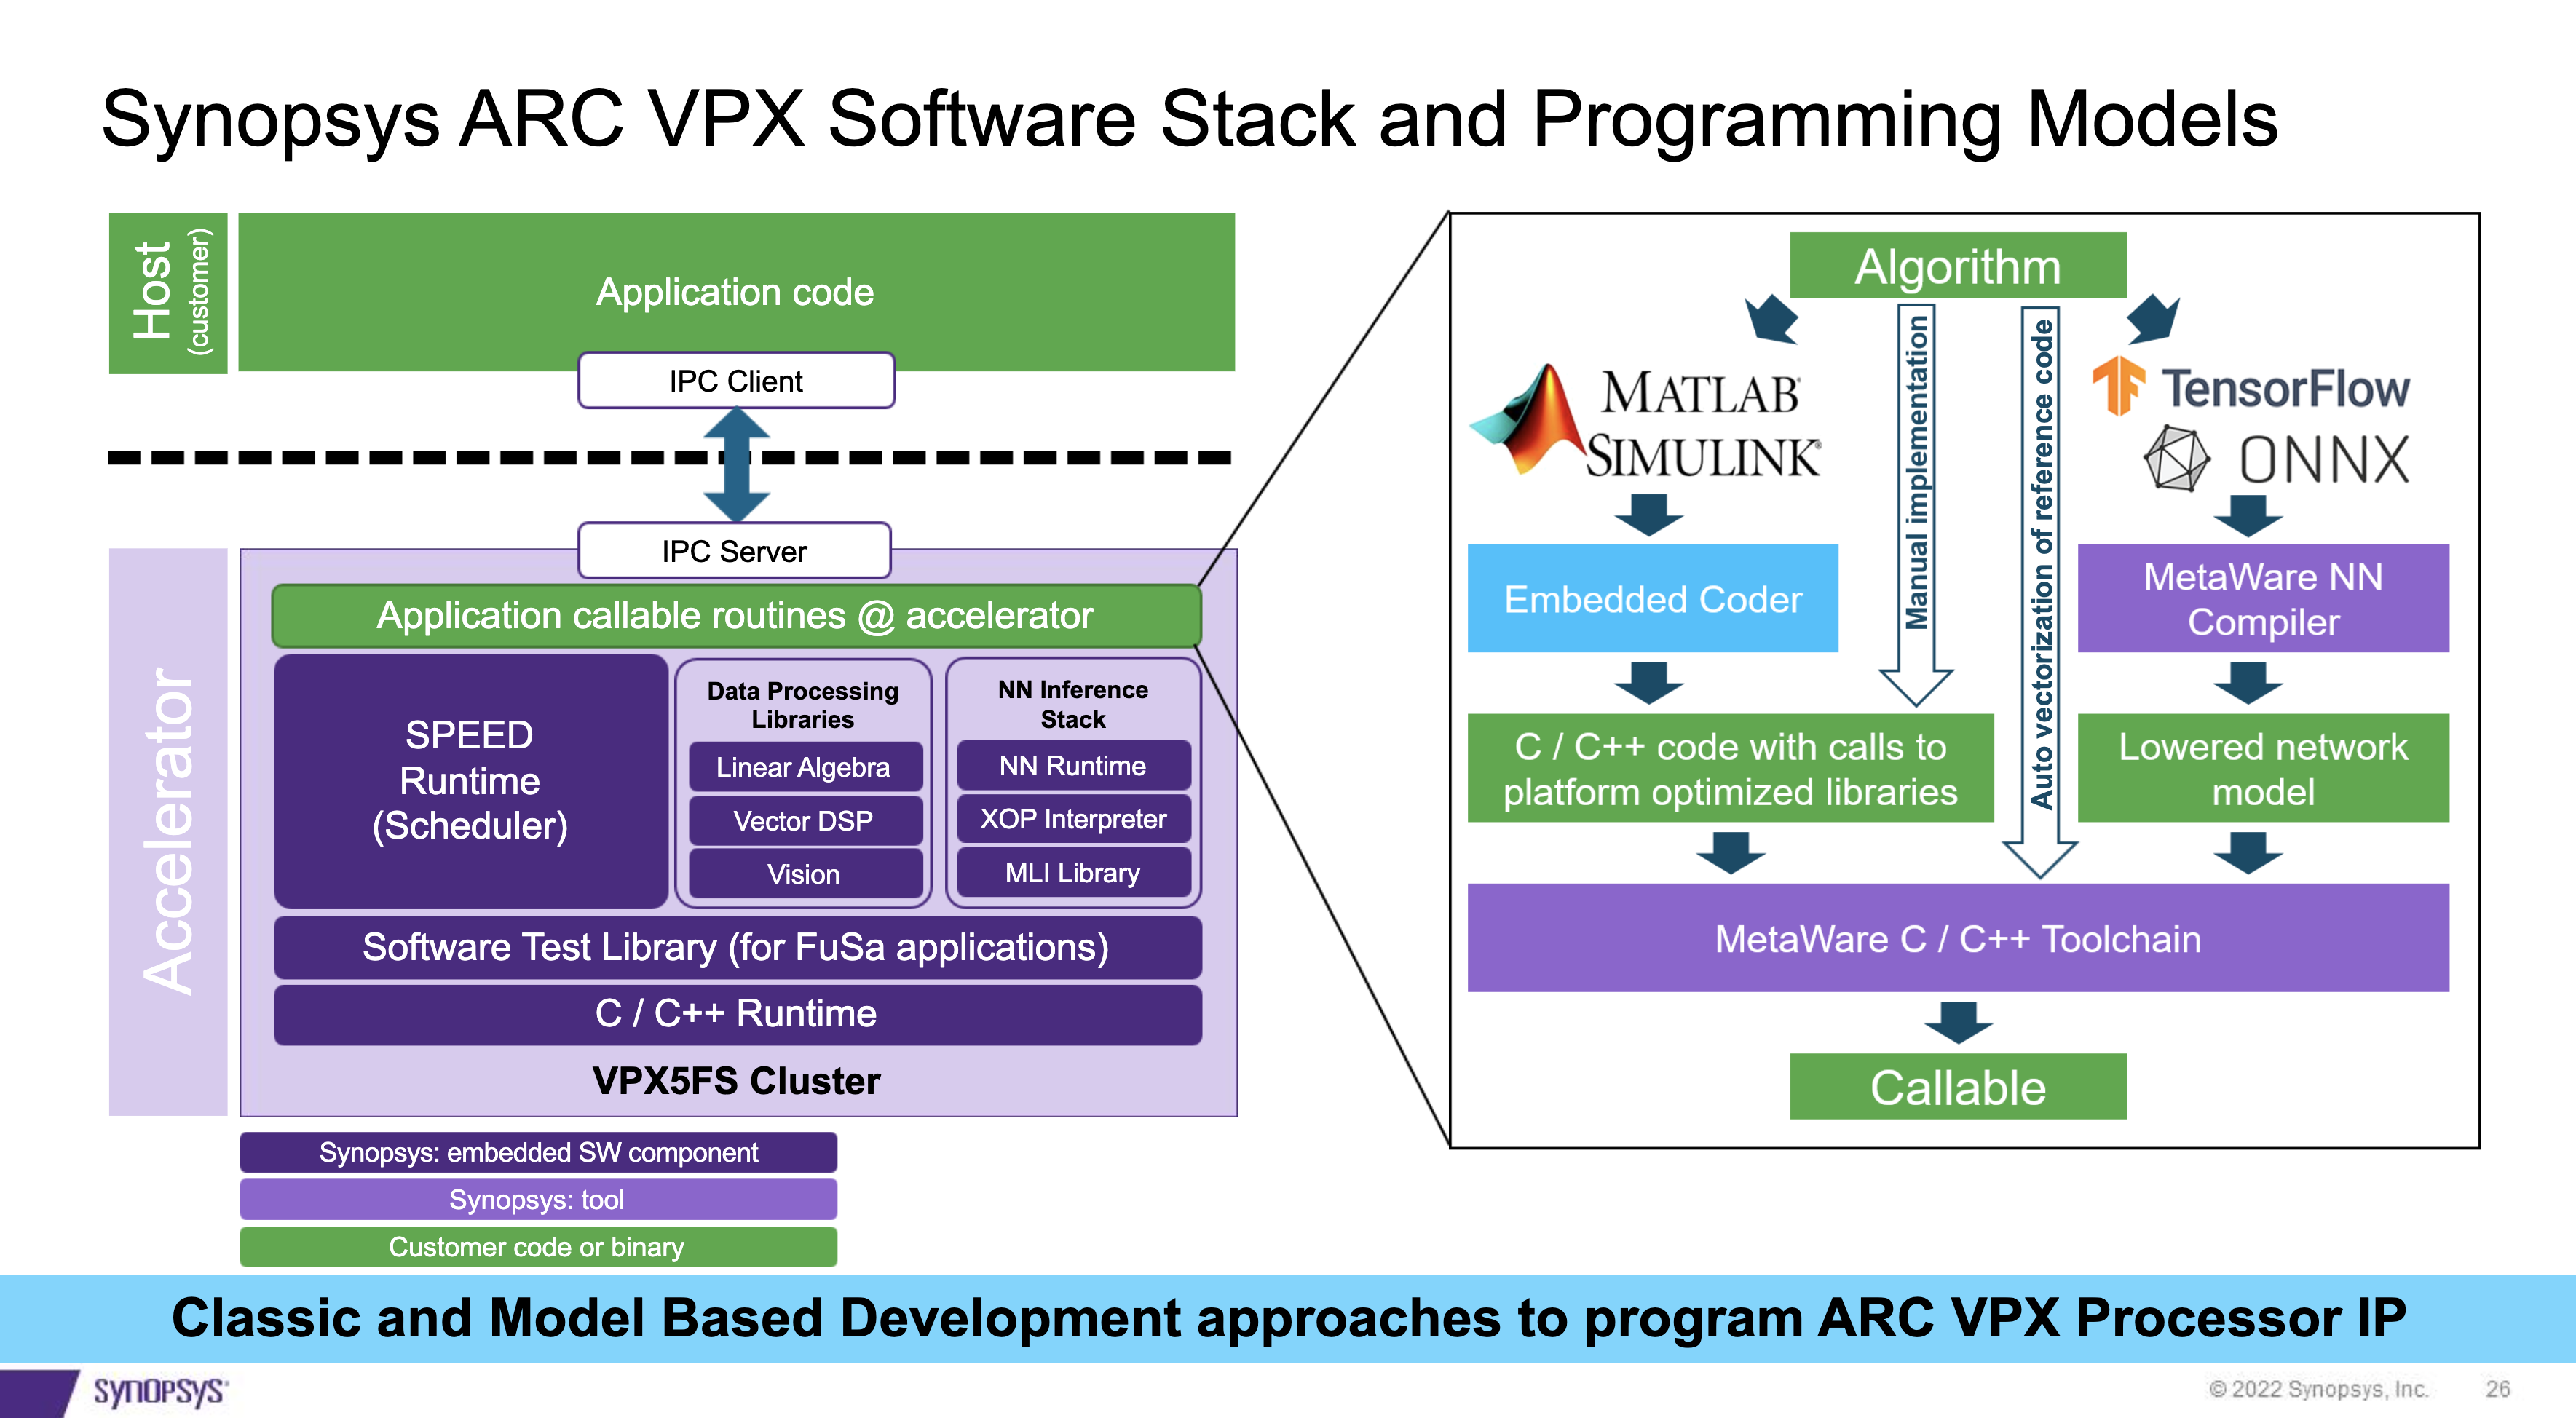 Synopsys ARC VPX Software Stack and Programming Models